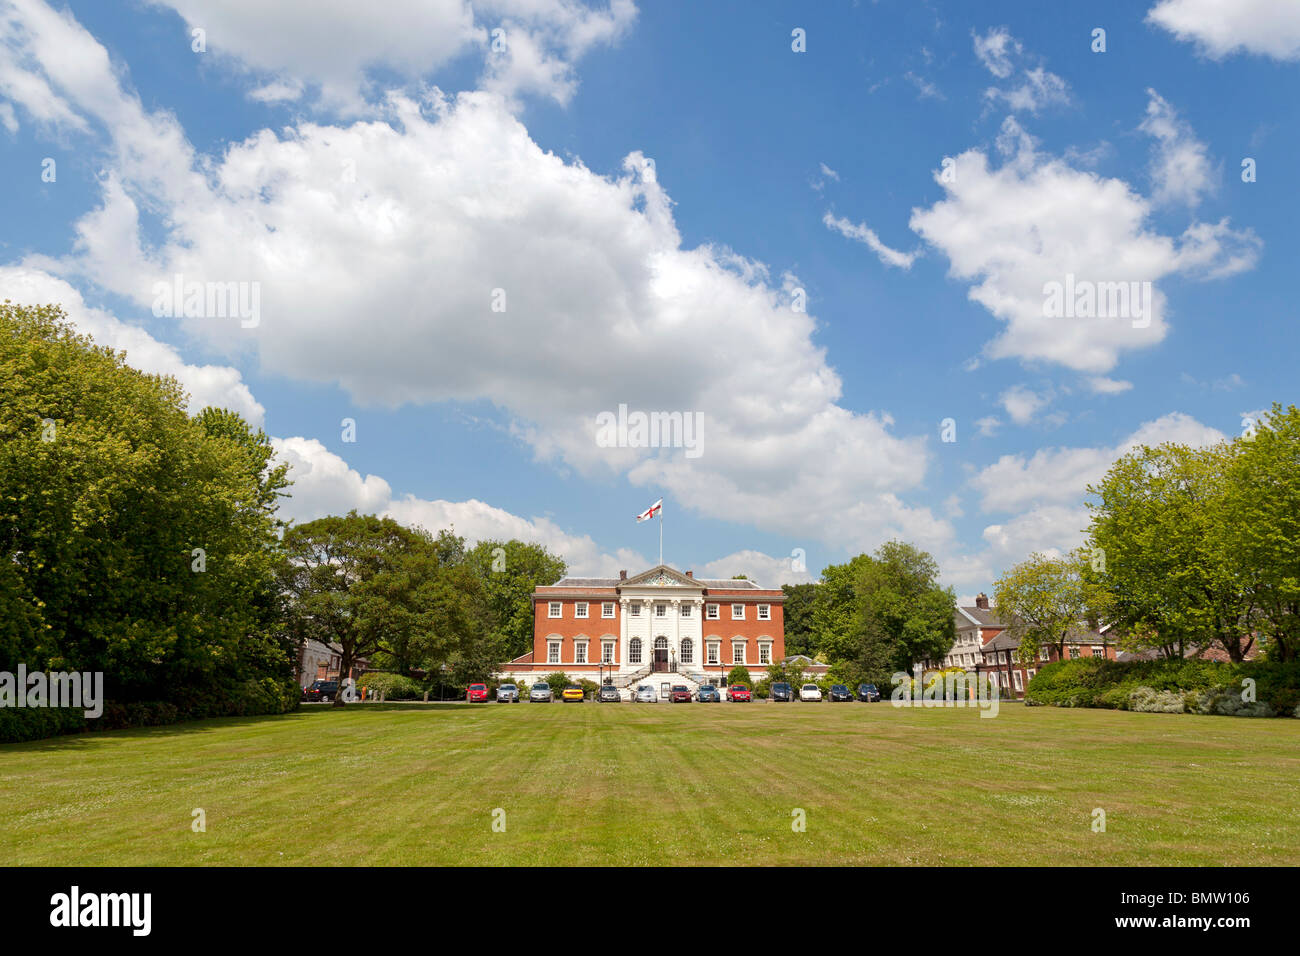 Warrington Town Hall and lawns. The former home of industrialist Joseph Crosfield. Stock Photo